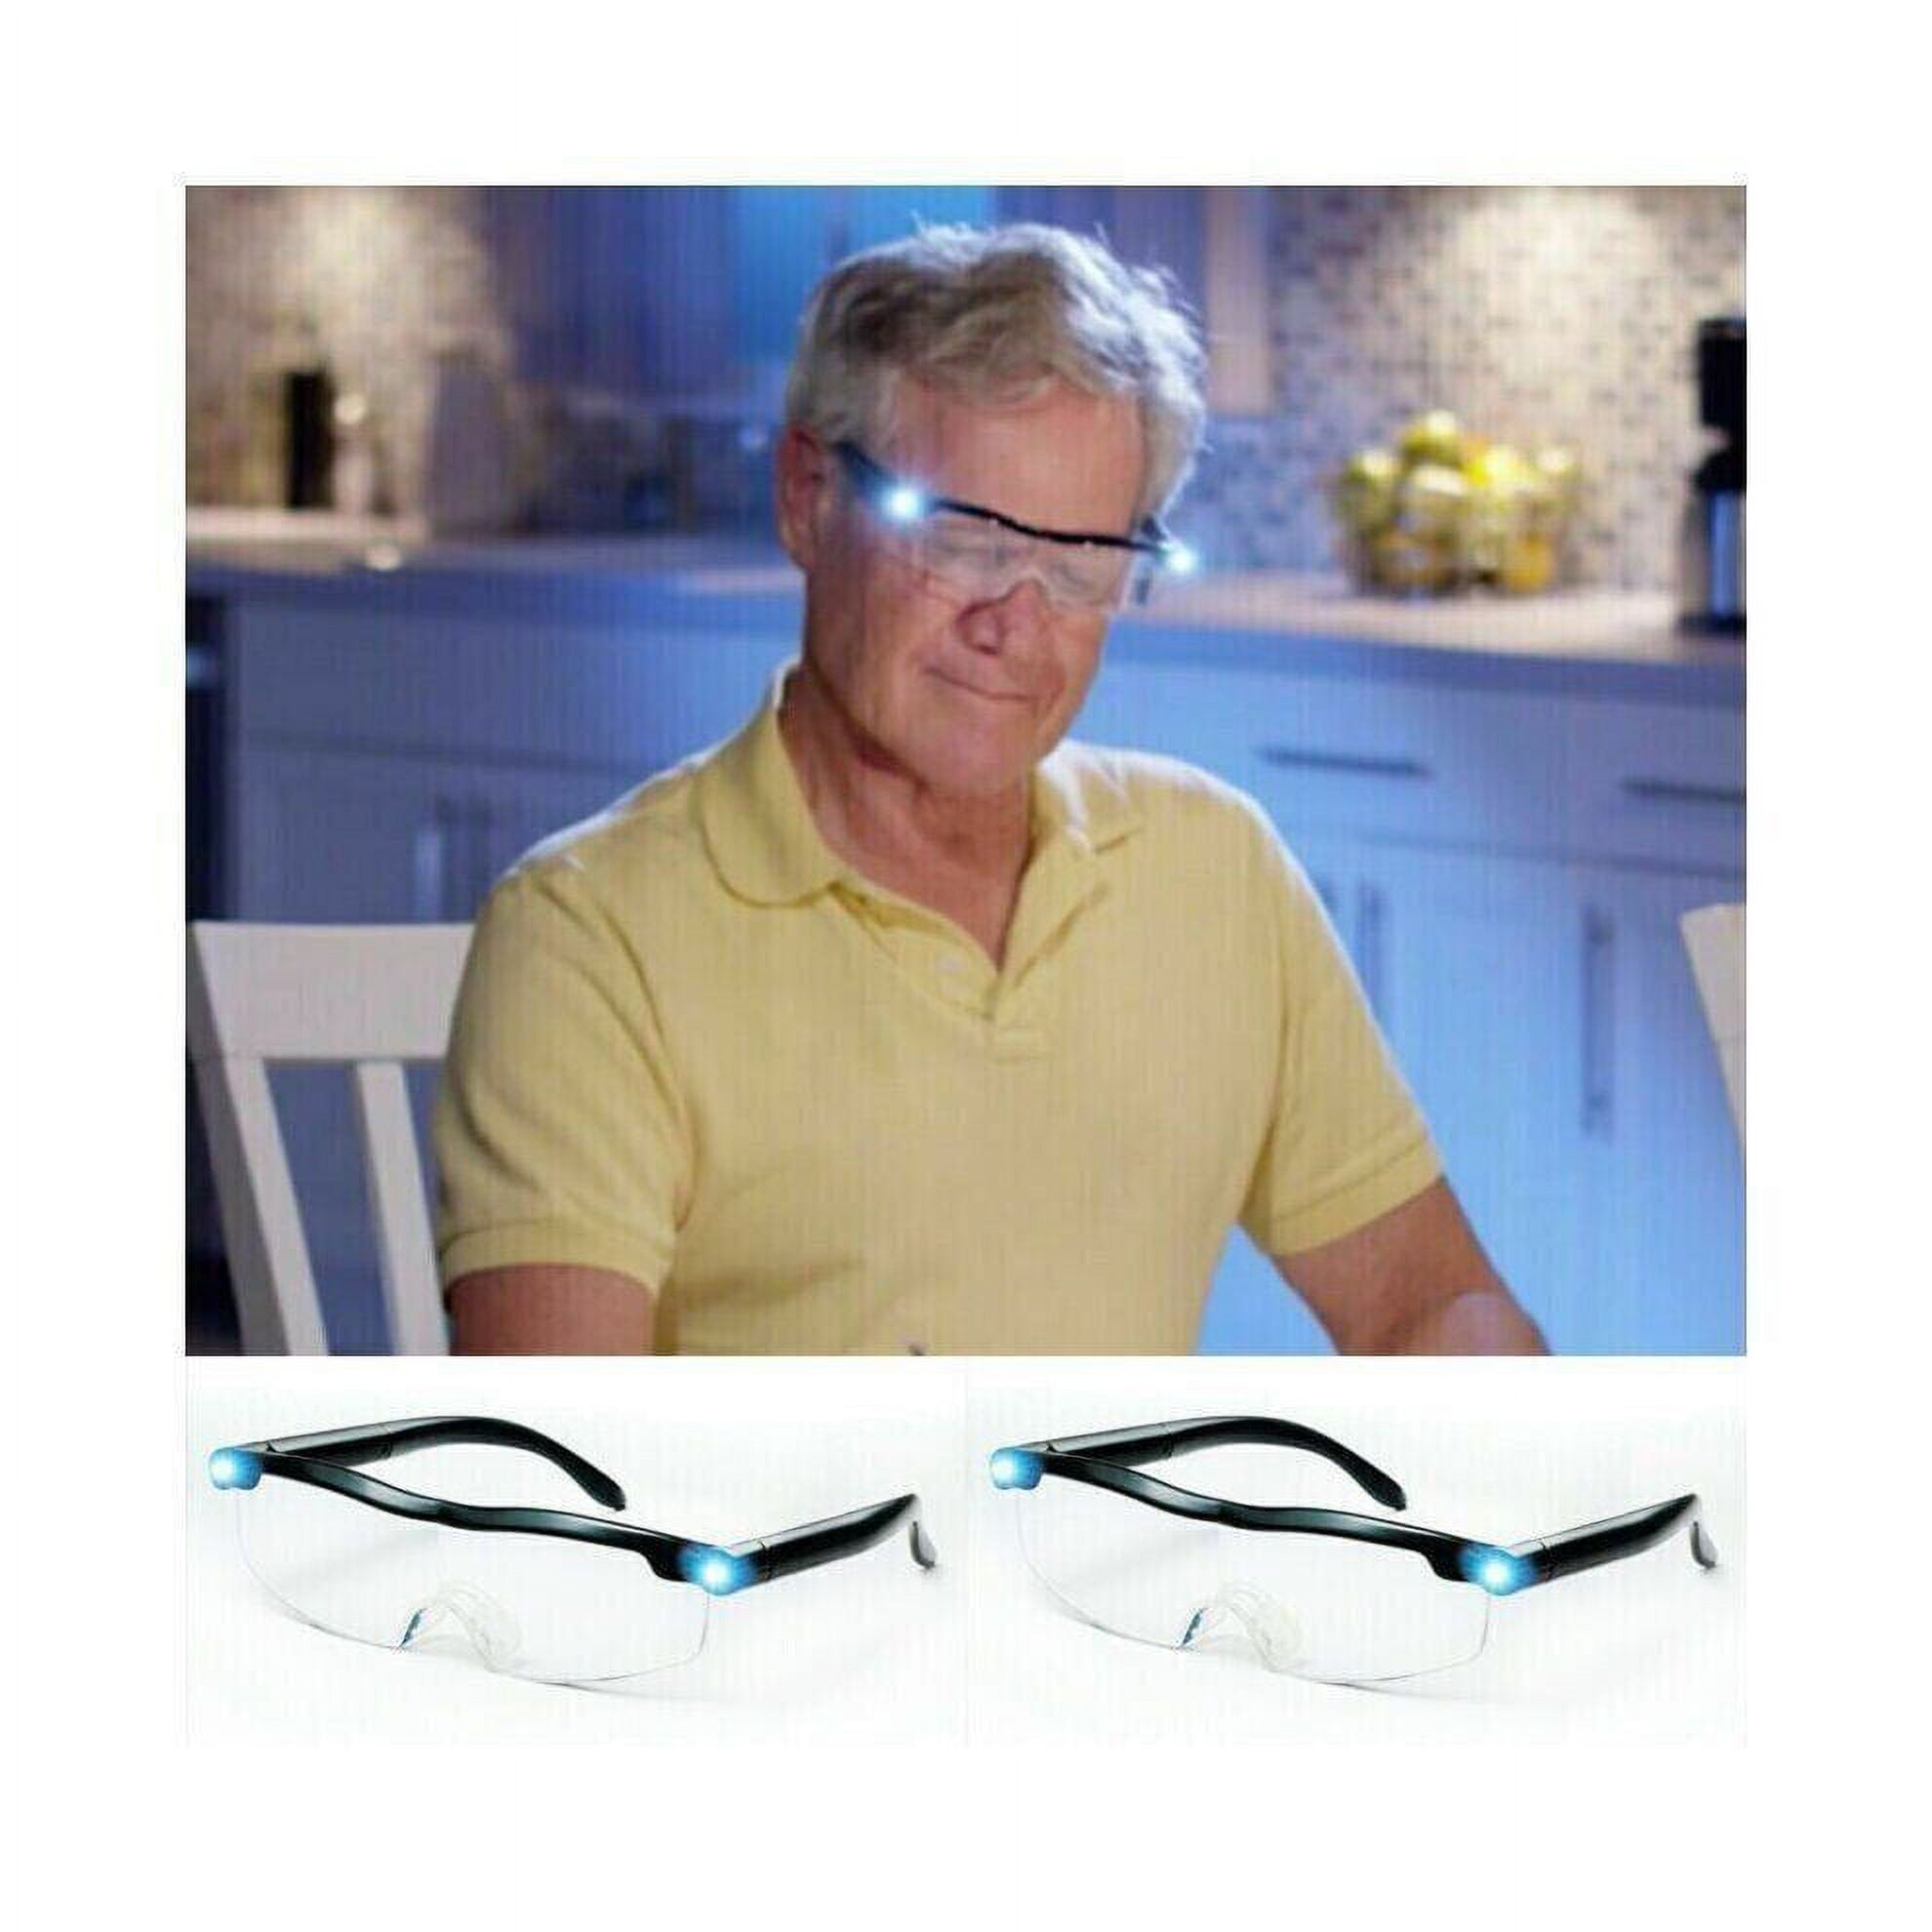 As Seen On TV Mighty Sight LED Magnifying Glasses